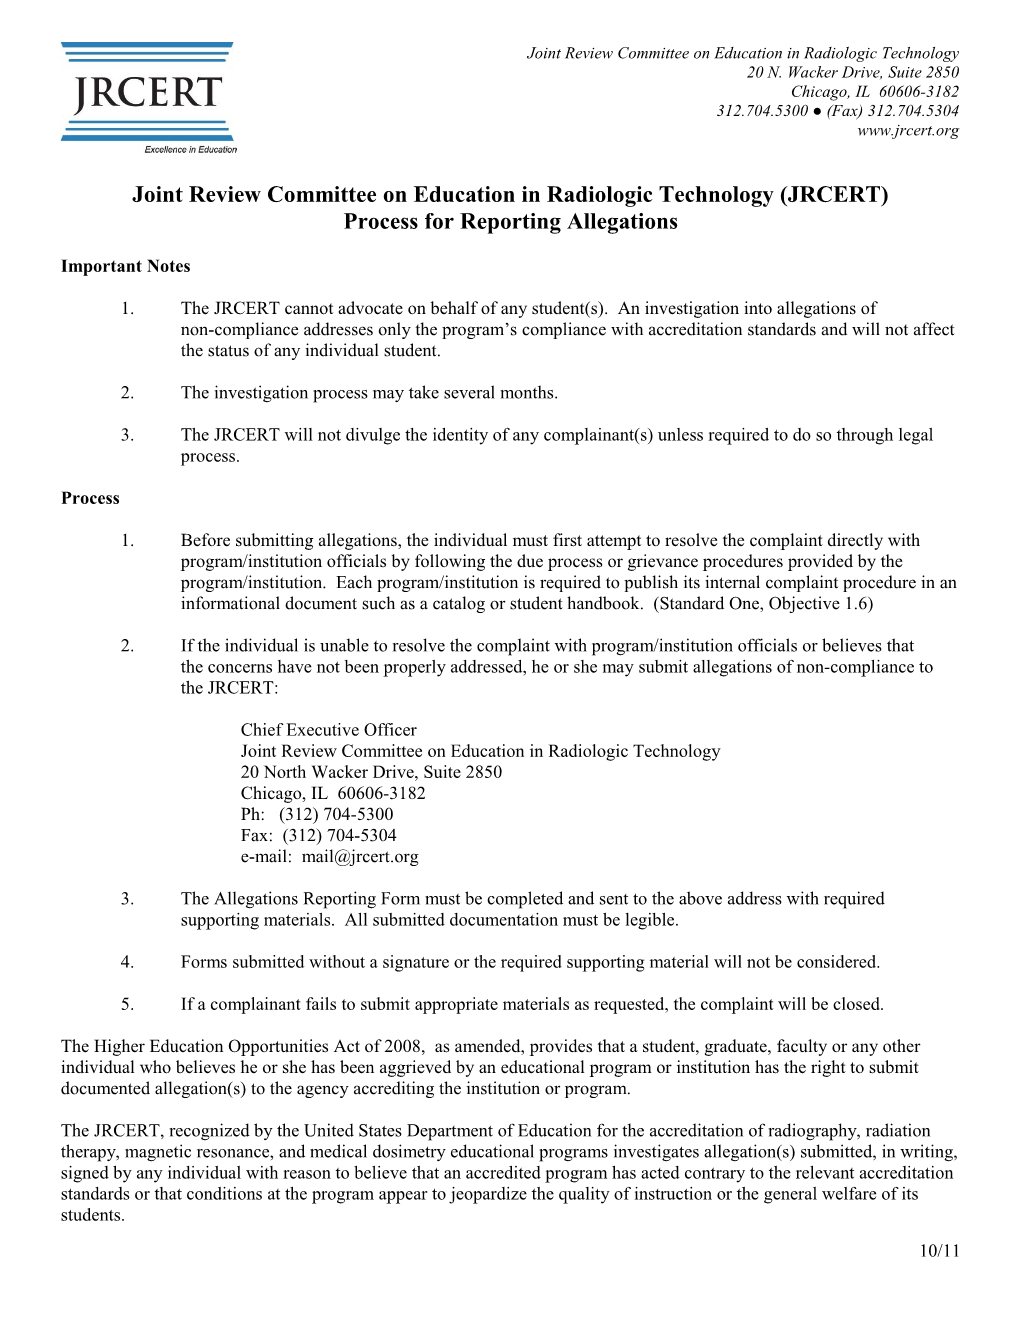 Joint Review Committee on Education in Radiologic Technology (JRCERT)